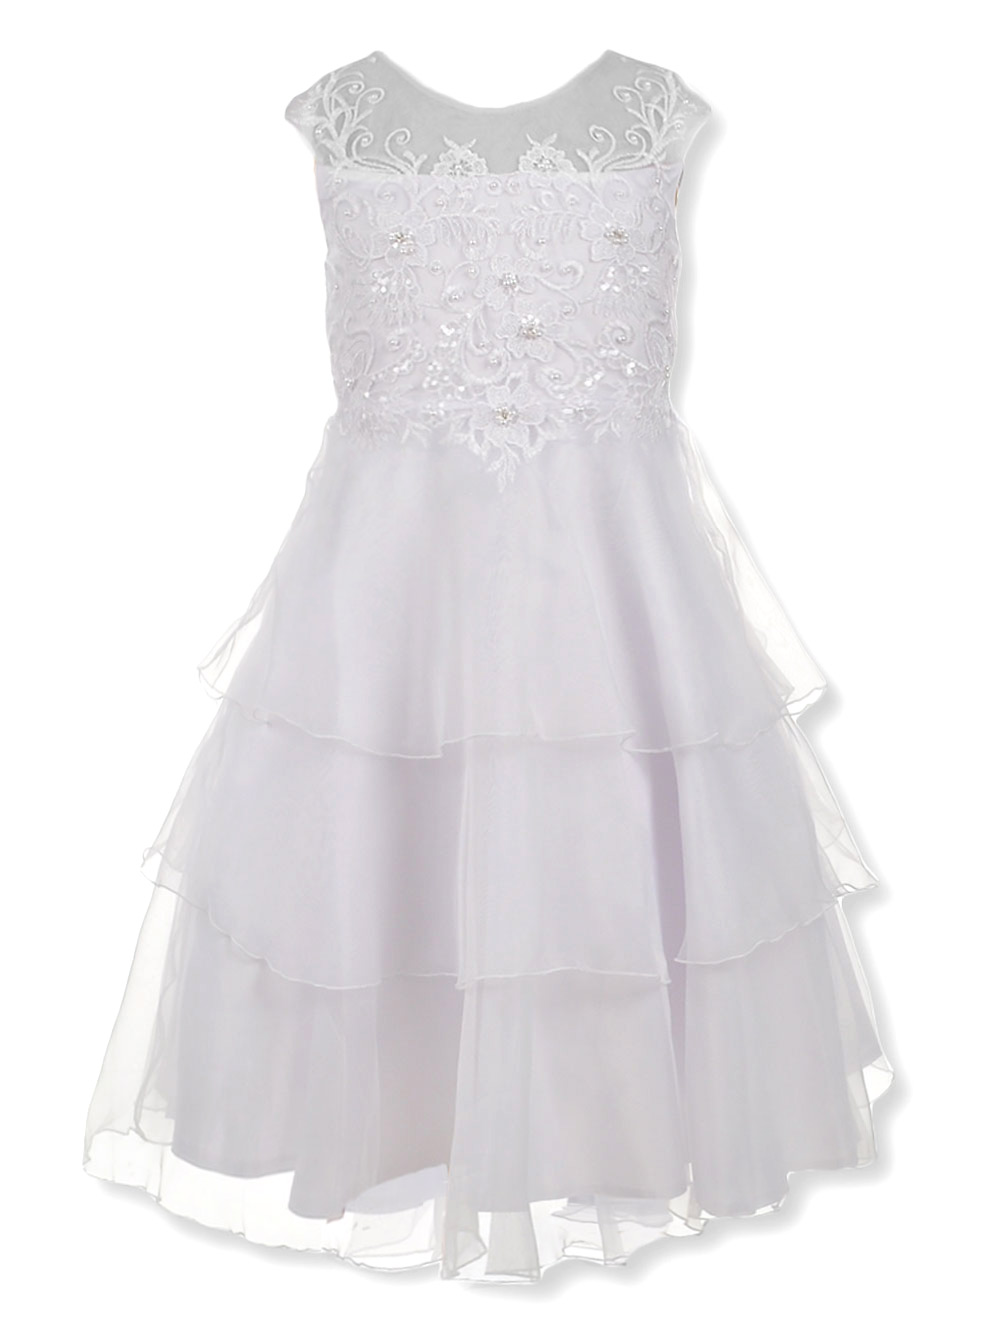 Size 7 Special Occasion Dresses for Girls